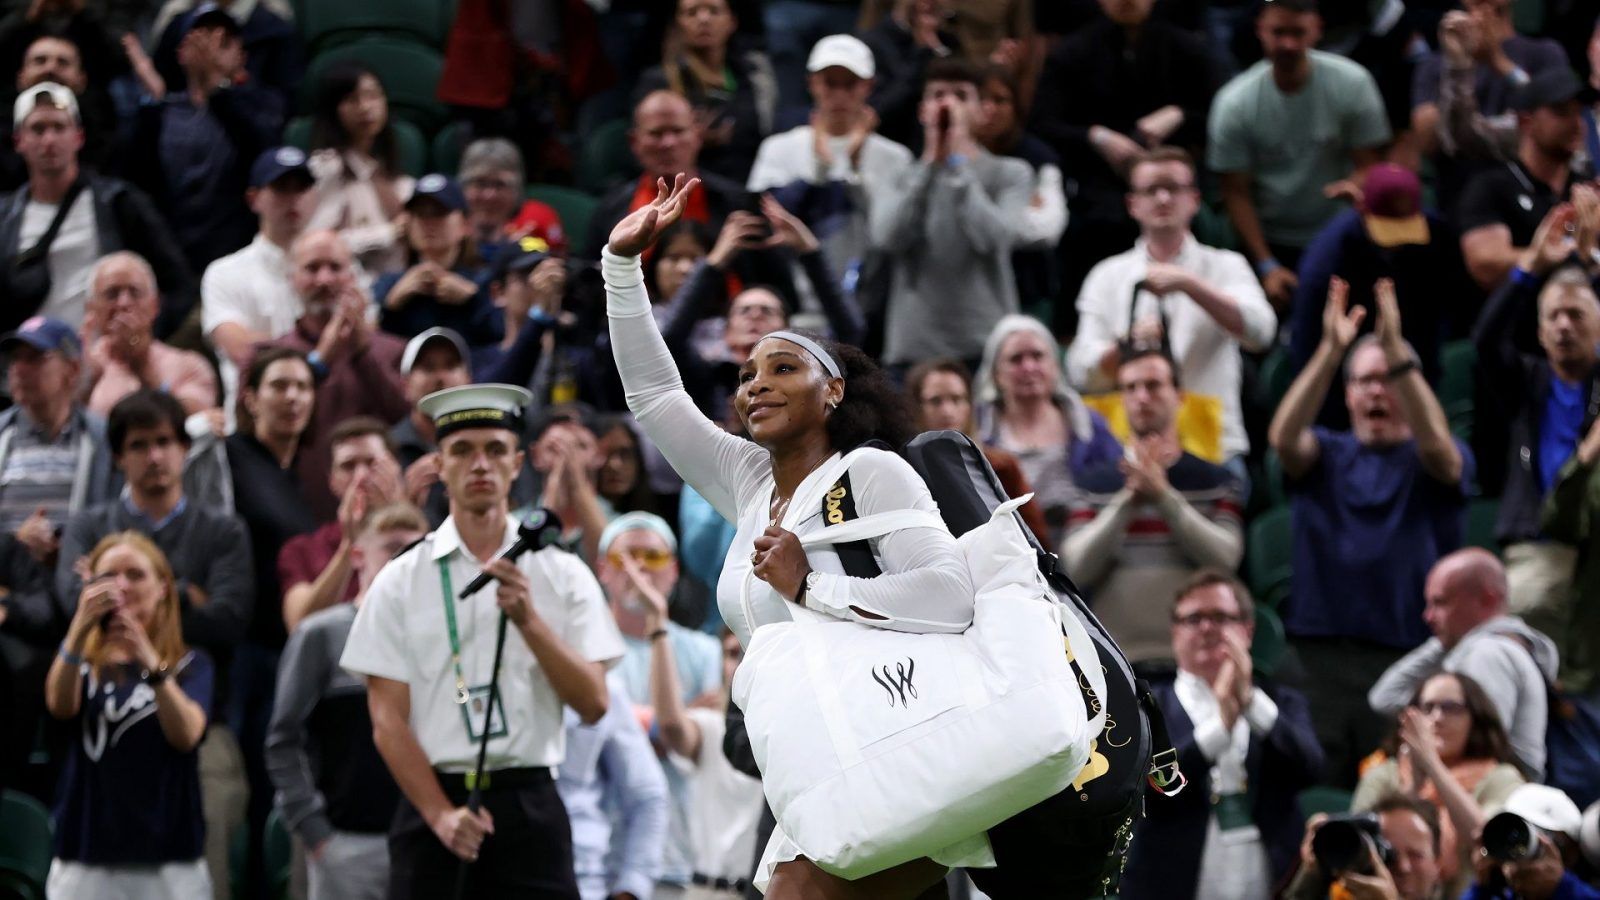 23-time Grand Slam champion Serena Williams to retire after US Open 2022